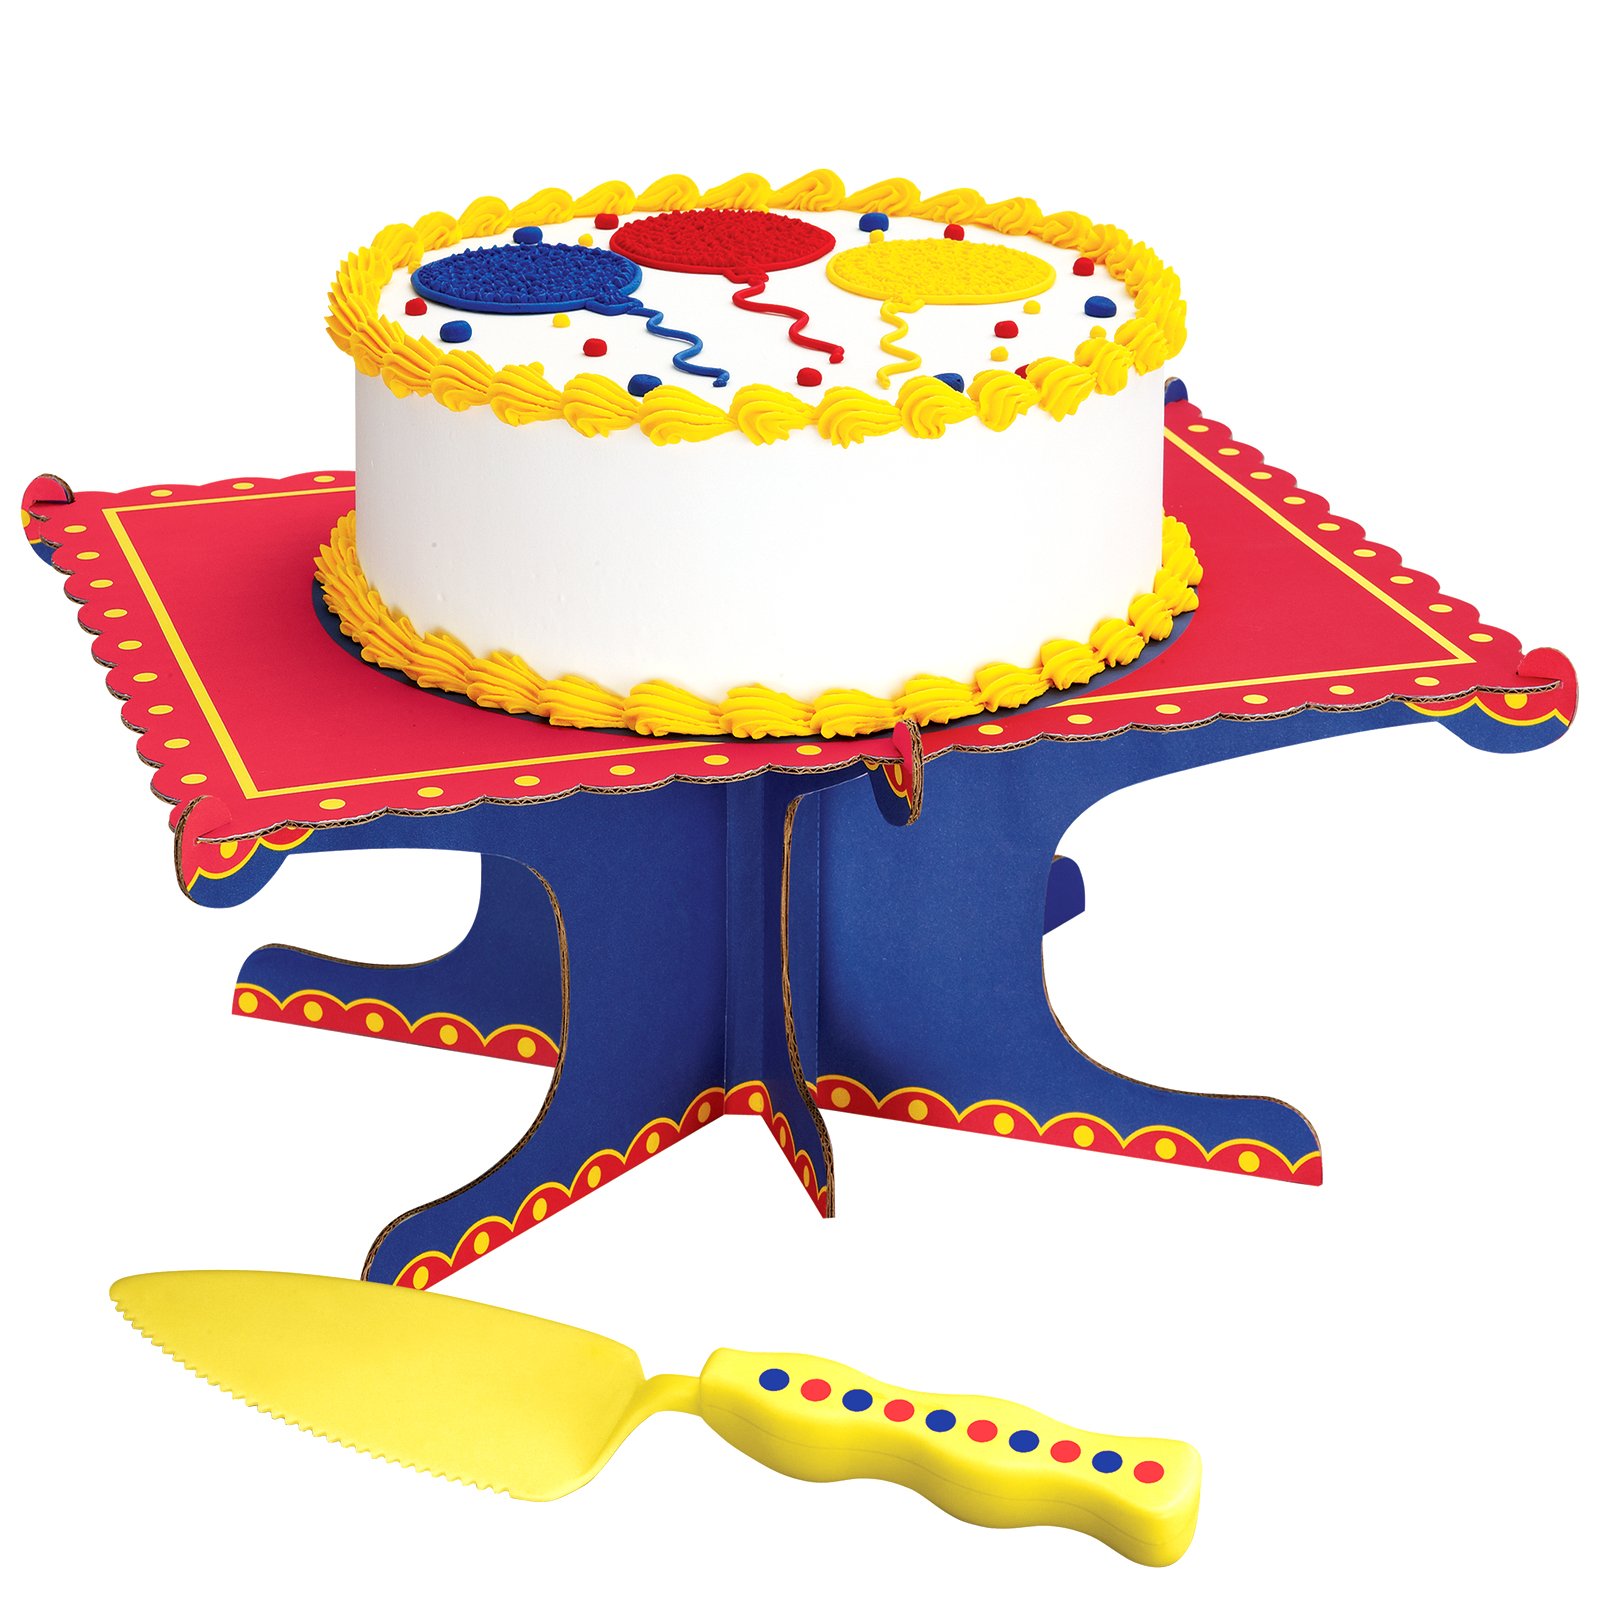 Primary Colors Cake Stand Kit - Click Image to Close